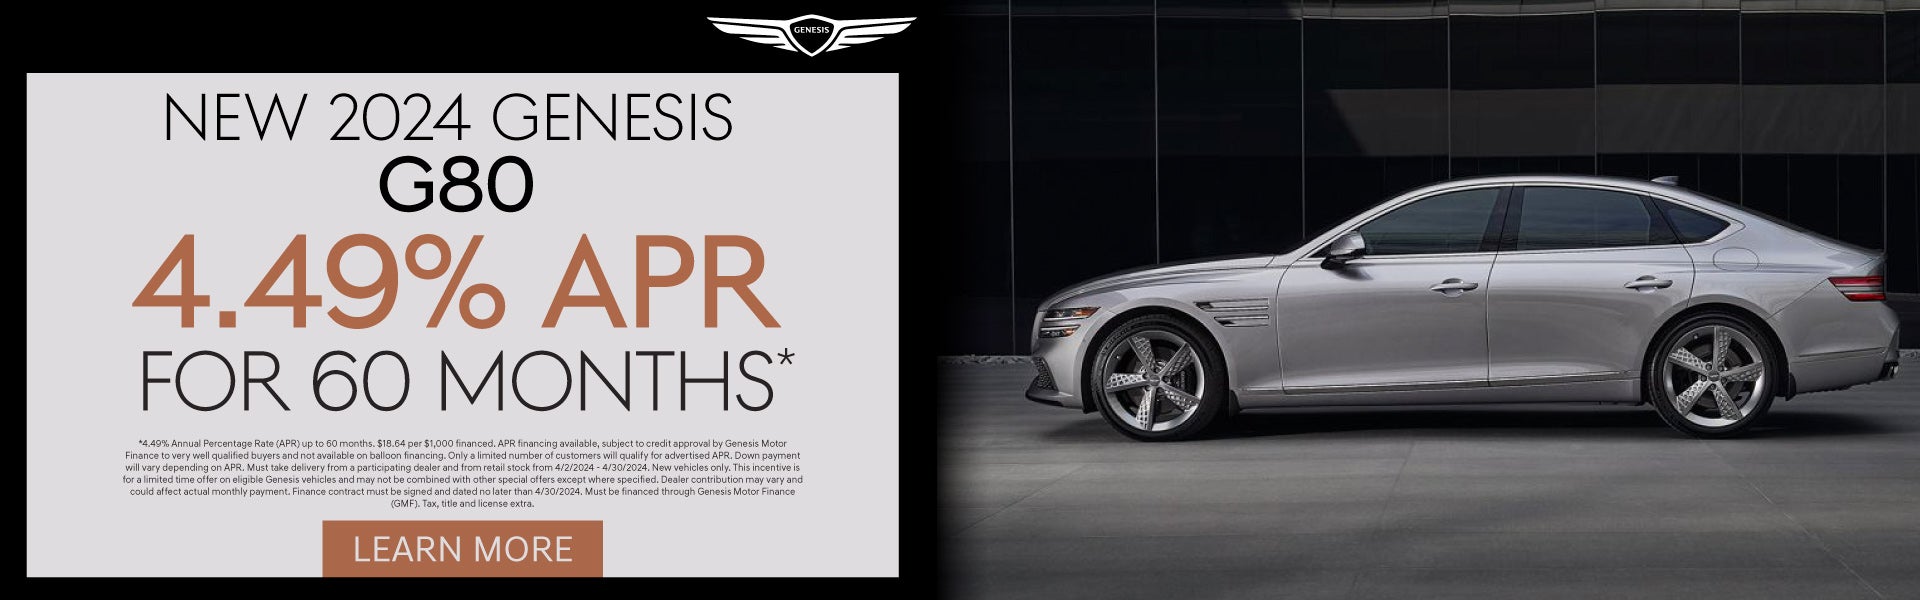 New 2024 Genesis G80 4.49% APR for 60 months* - Learn More